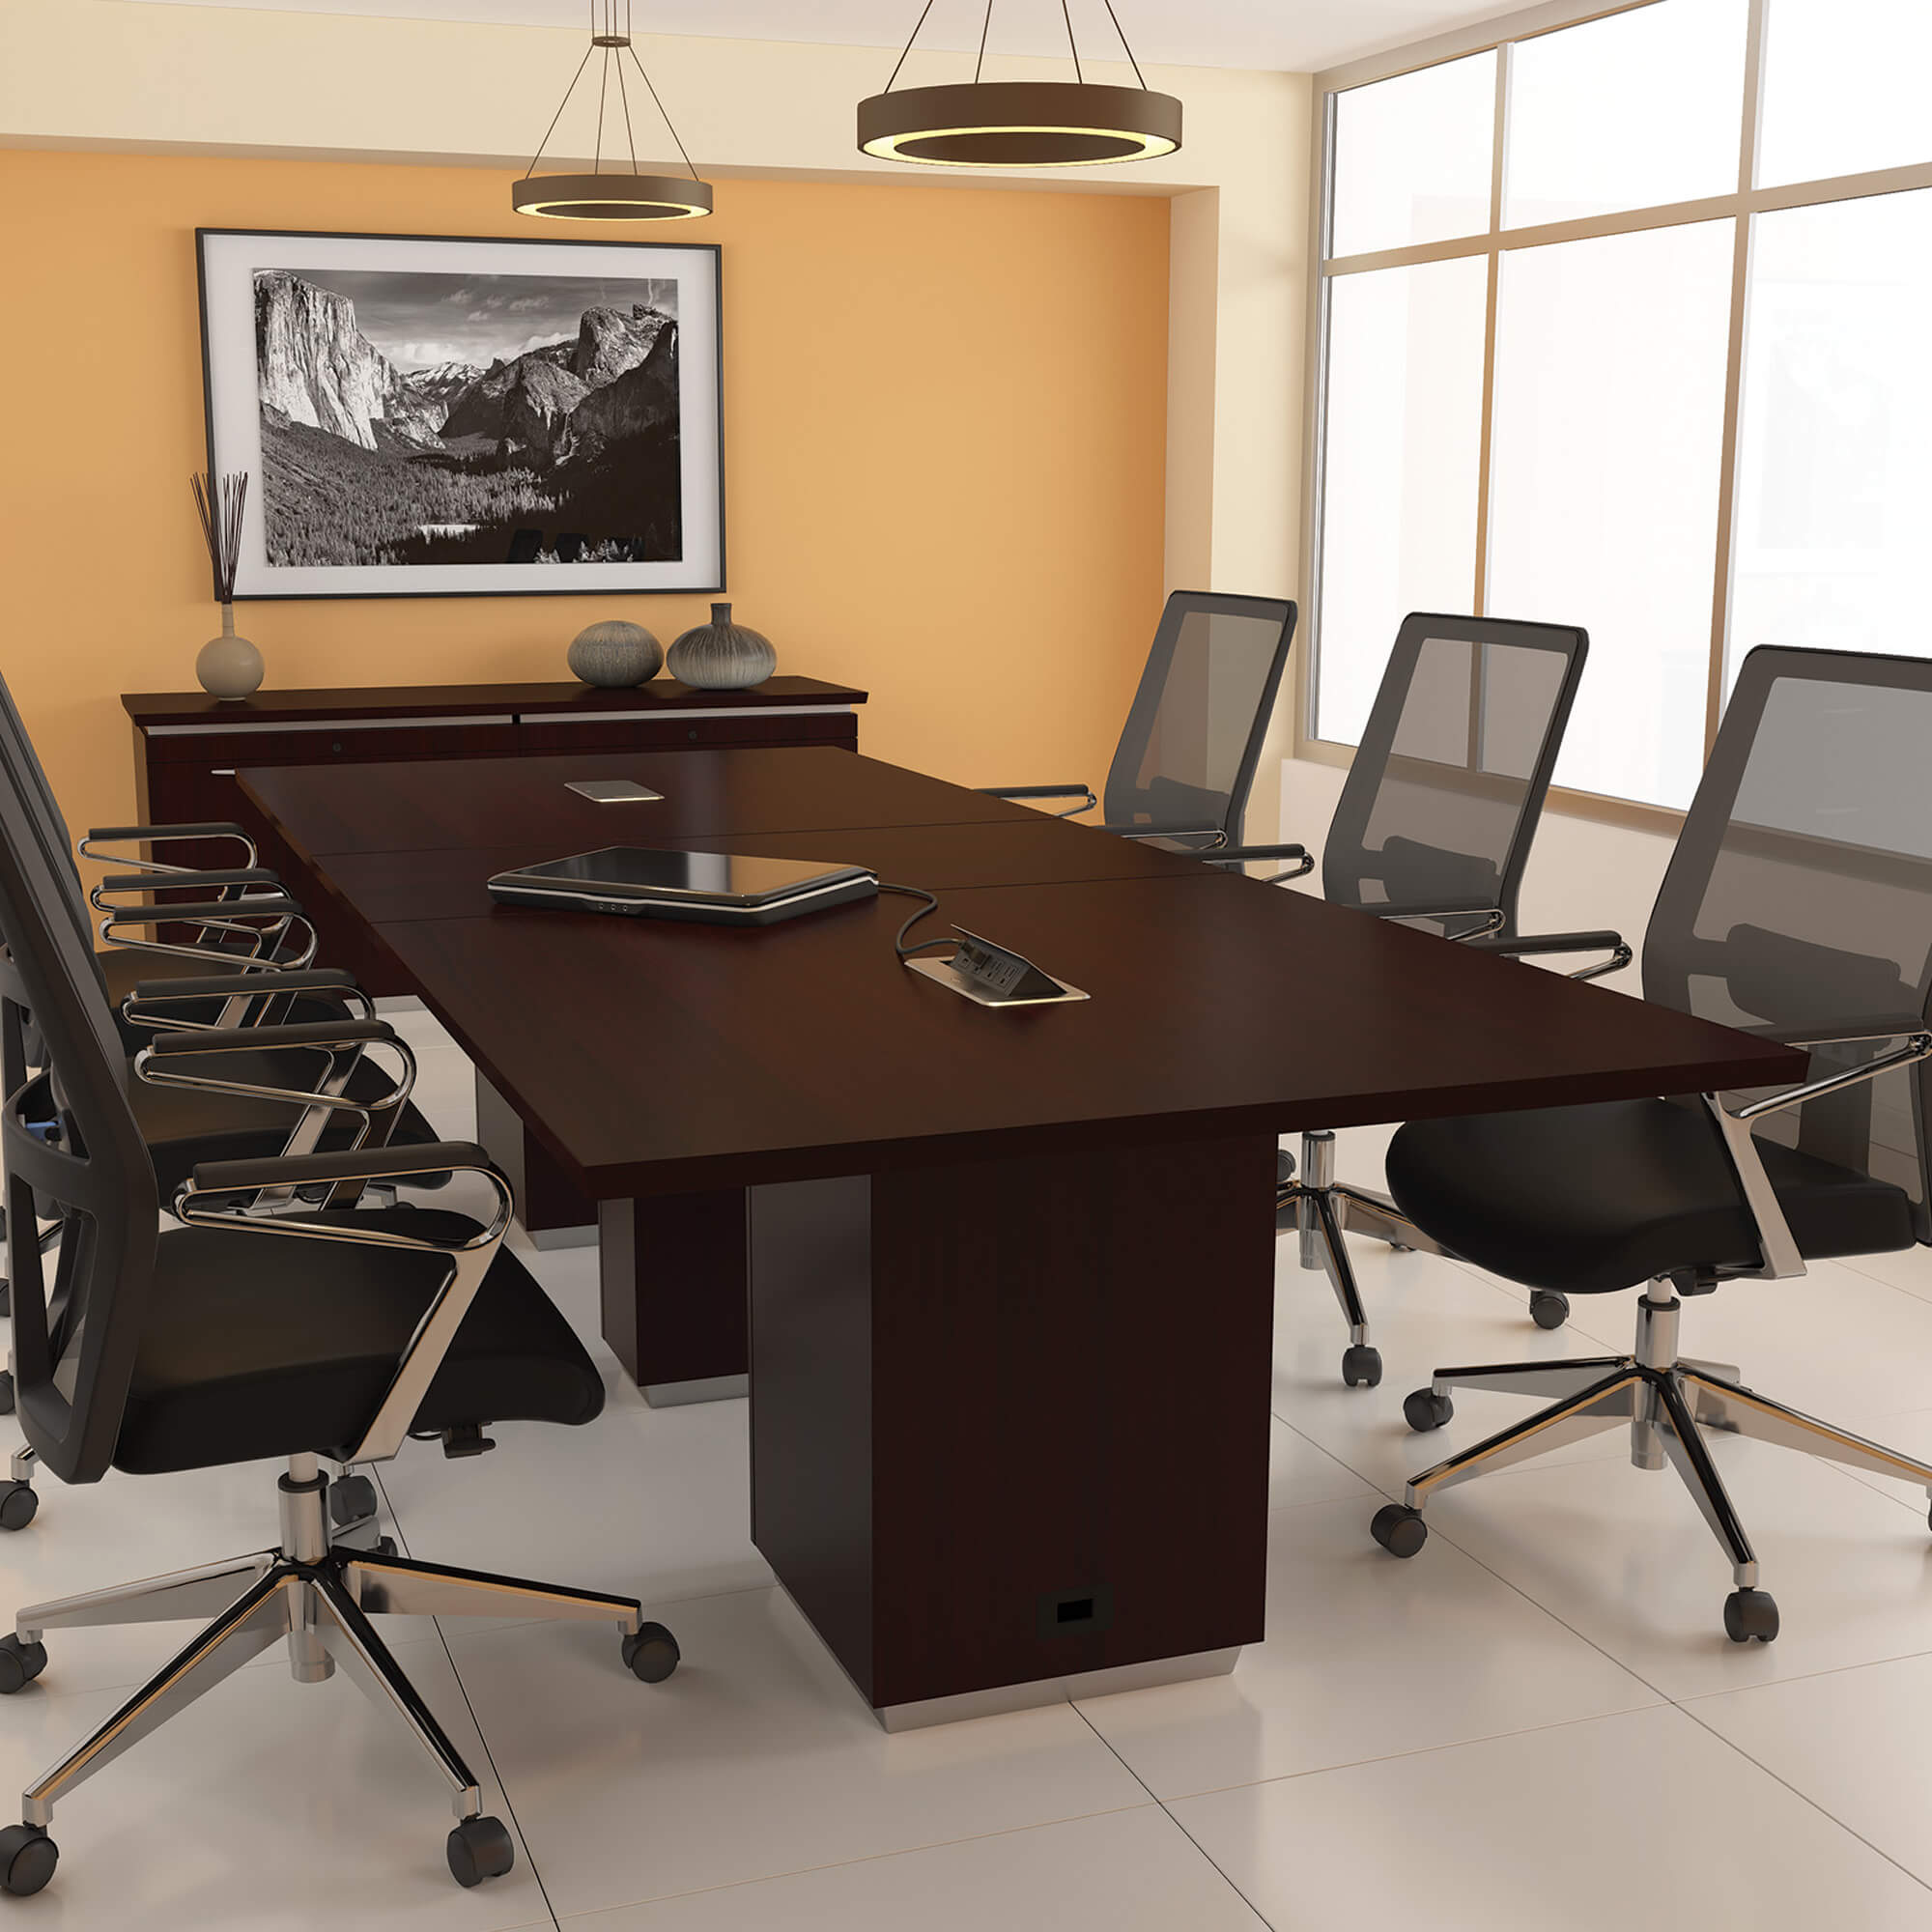 Conference tables CUB TUXDKR 61 PSO lifestyle